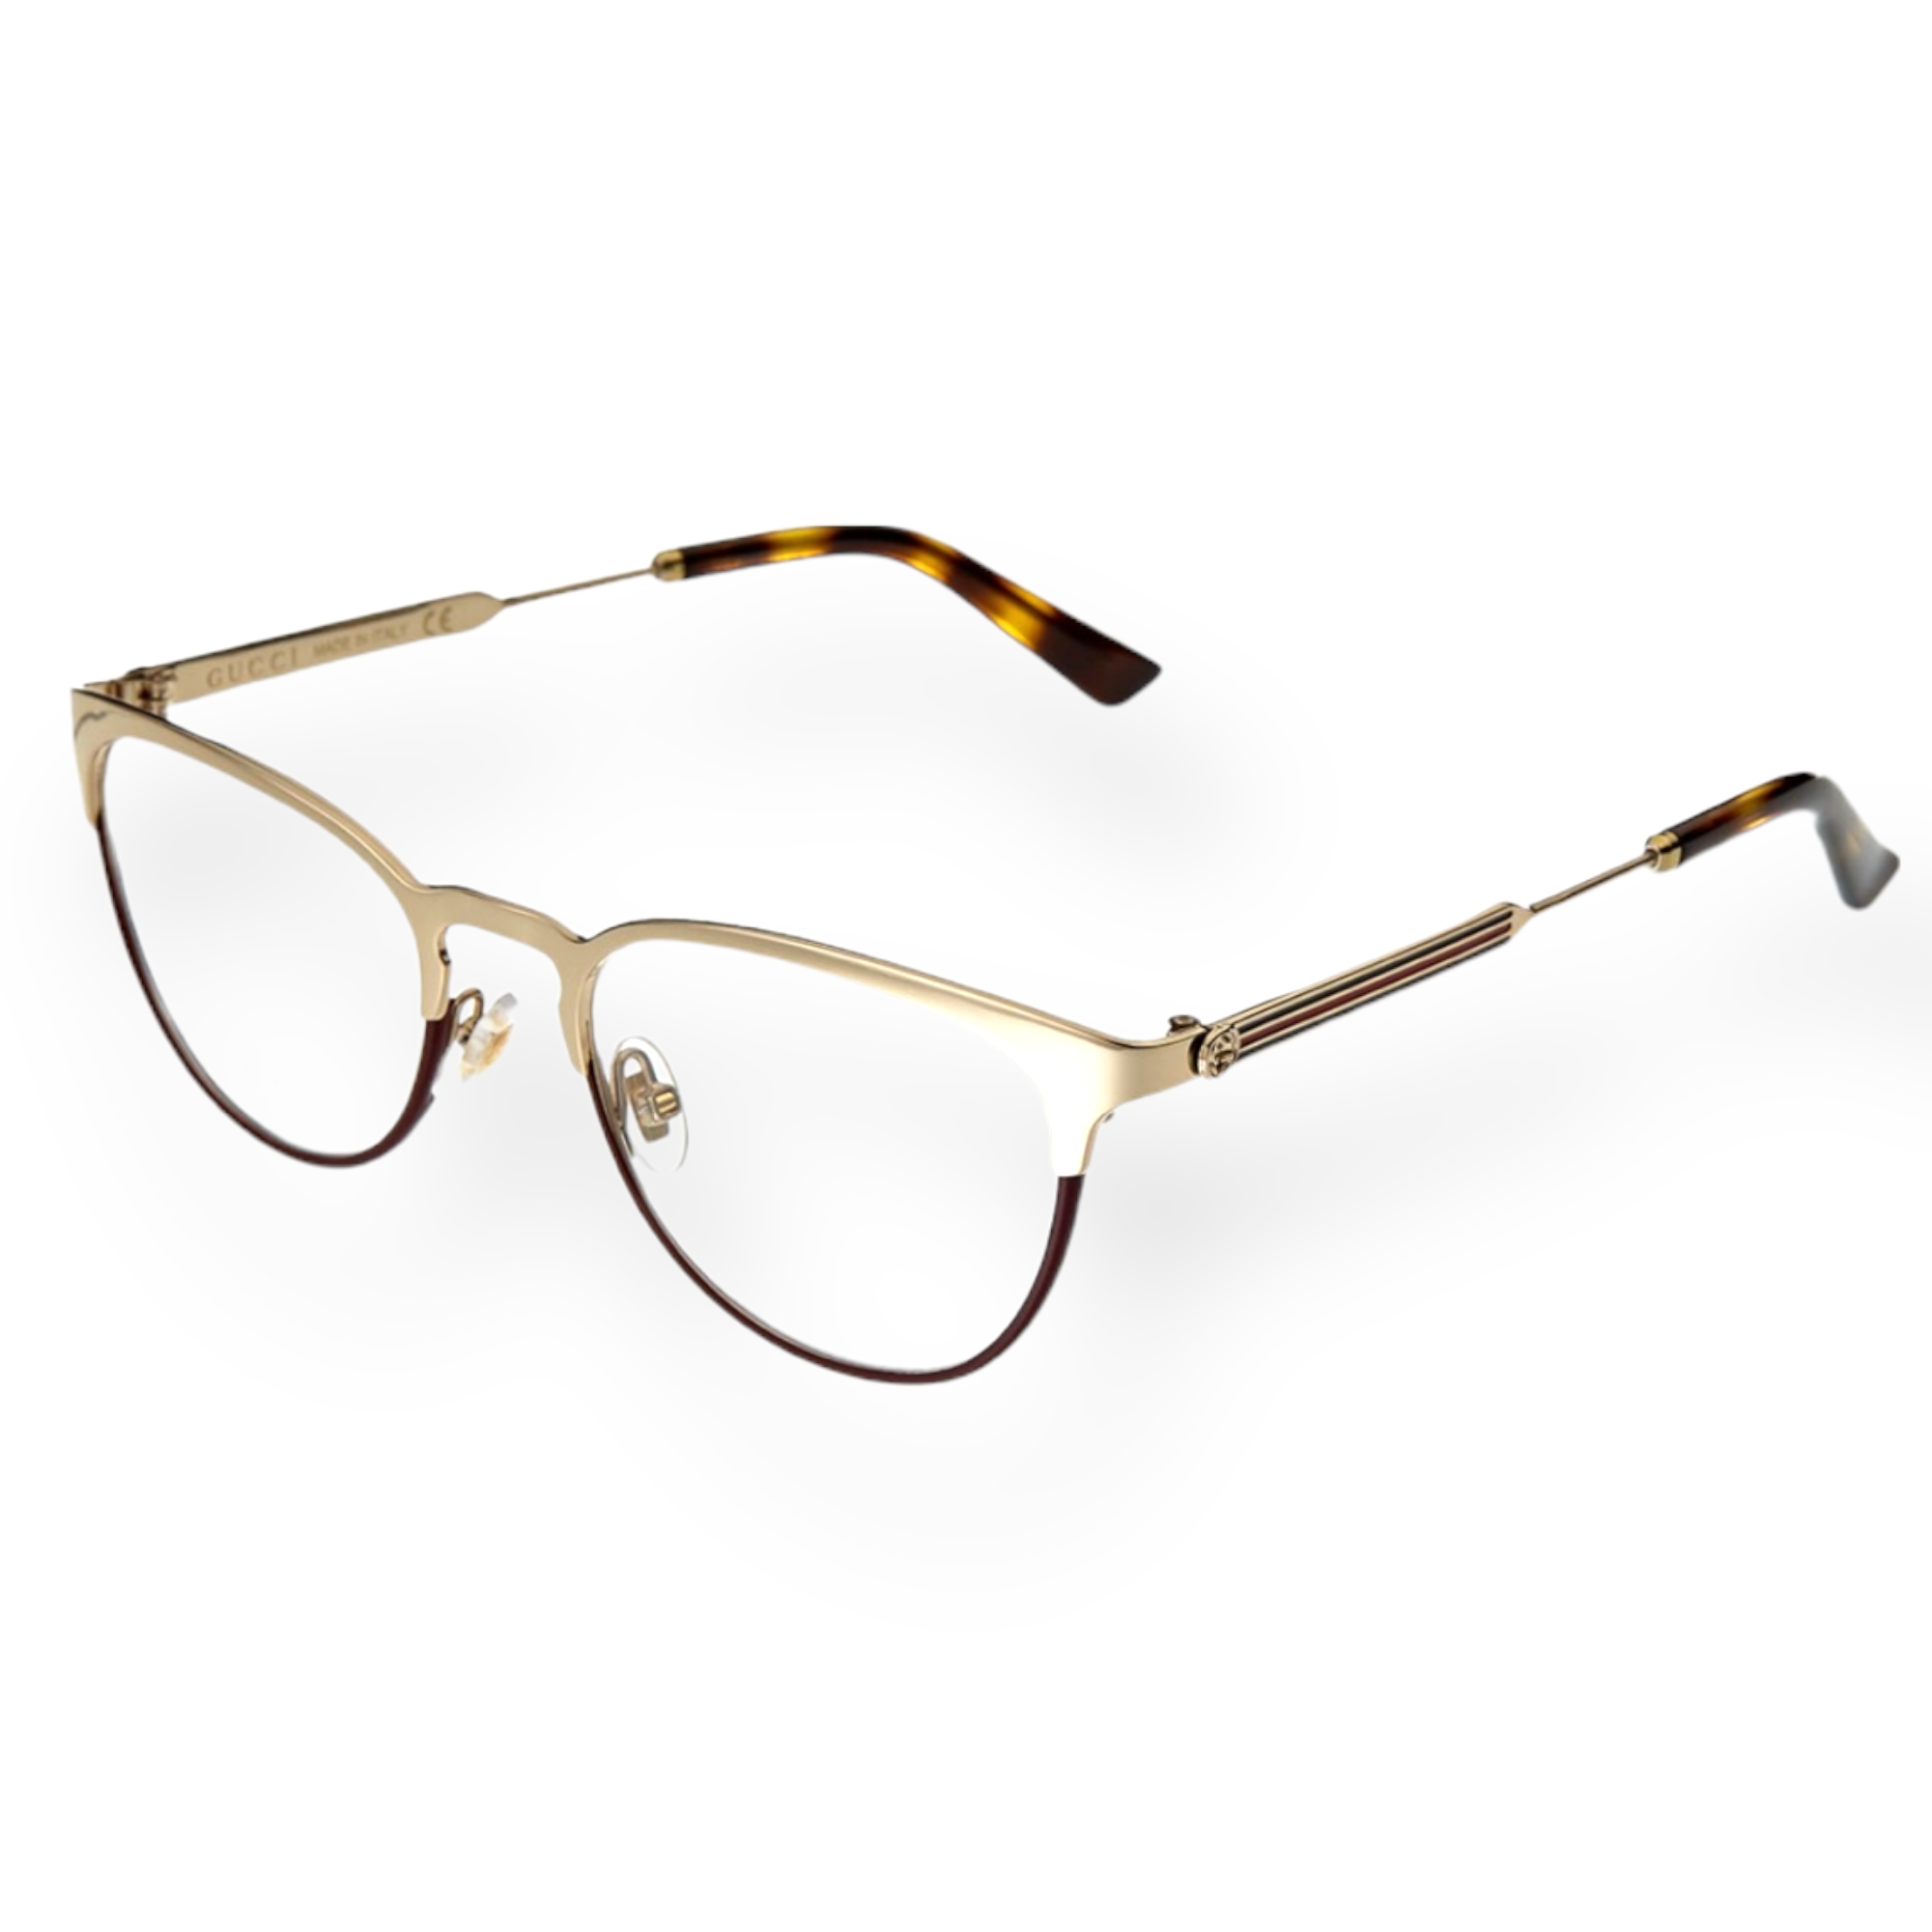 Gucci Women's 61mm Optical Frames with Demo Lens